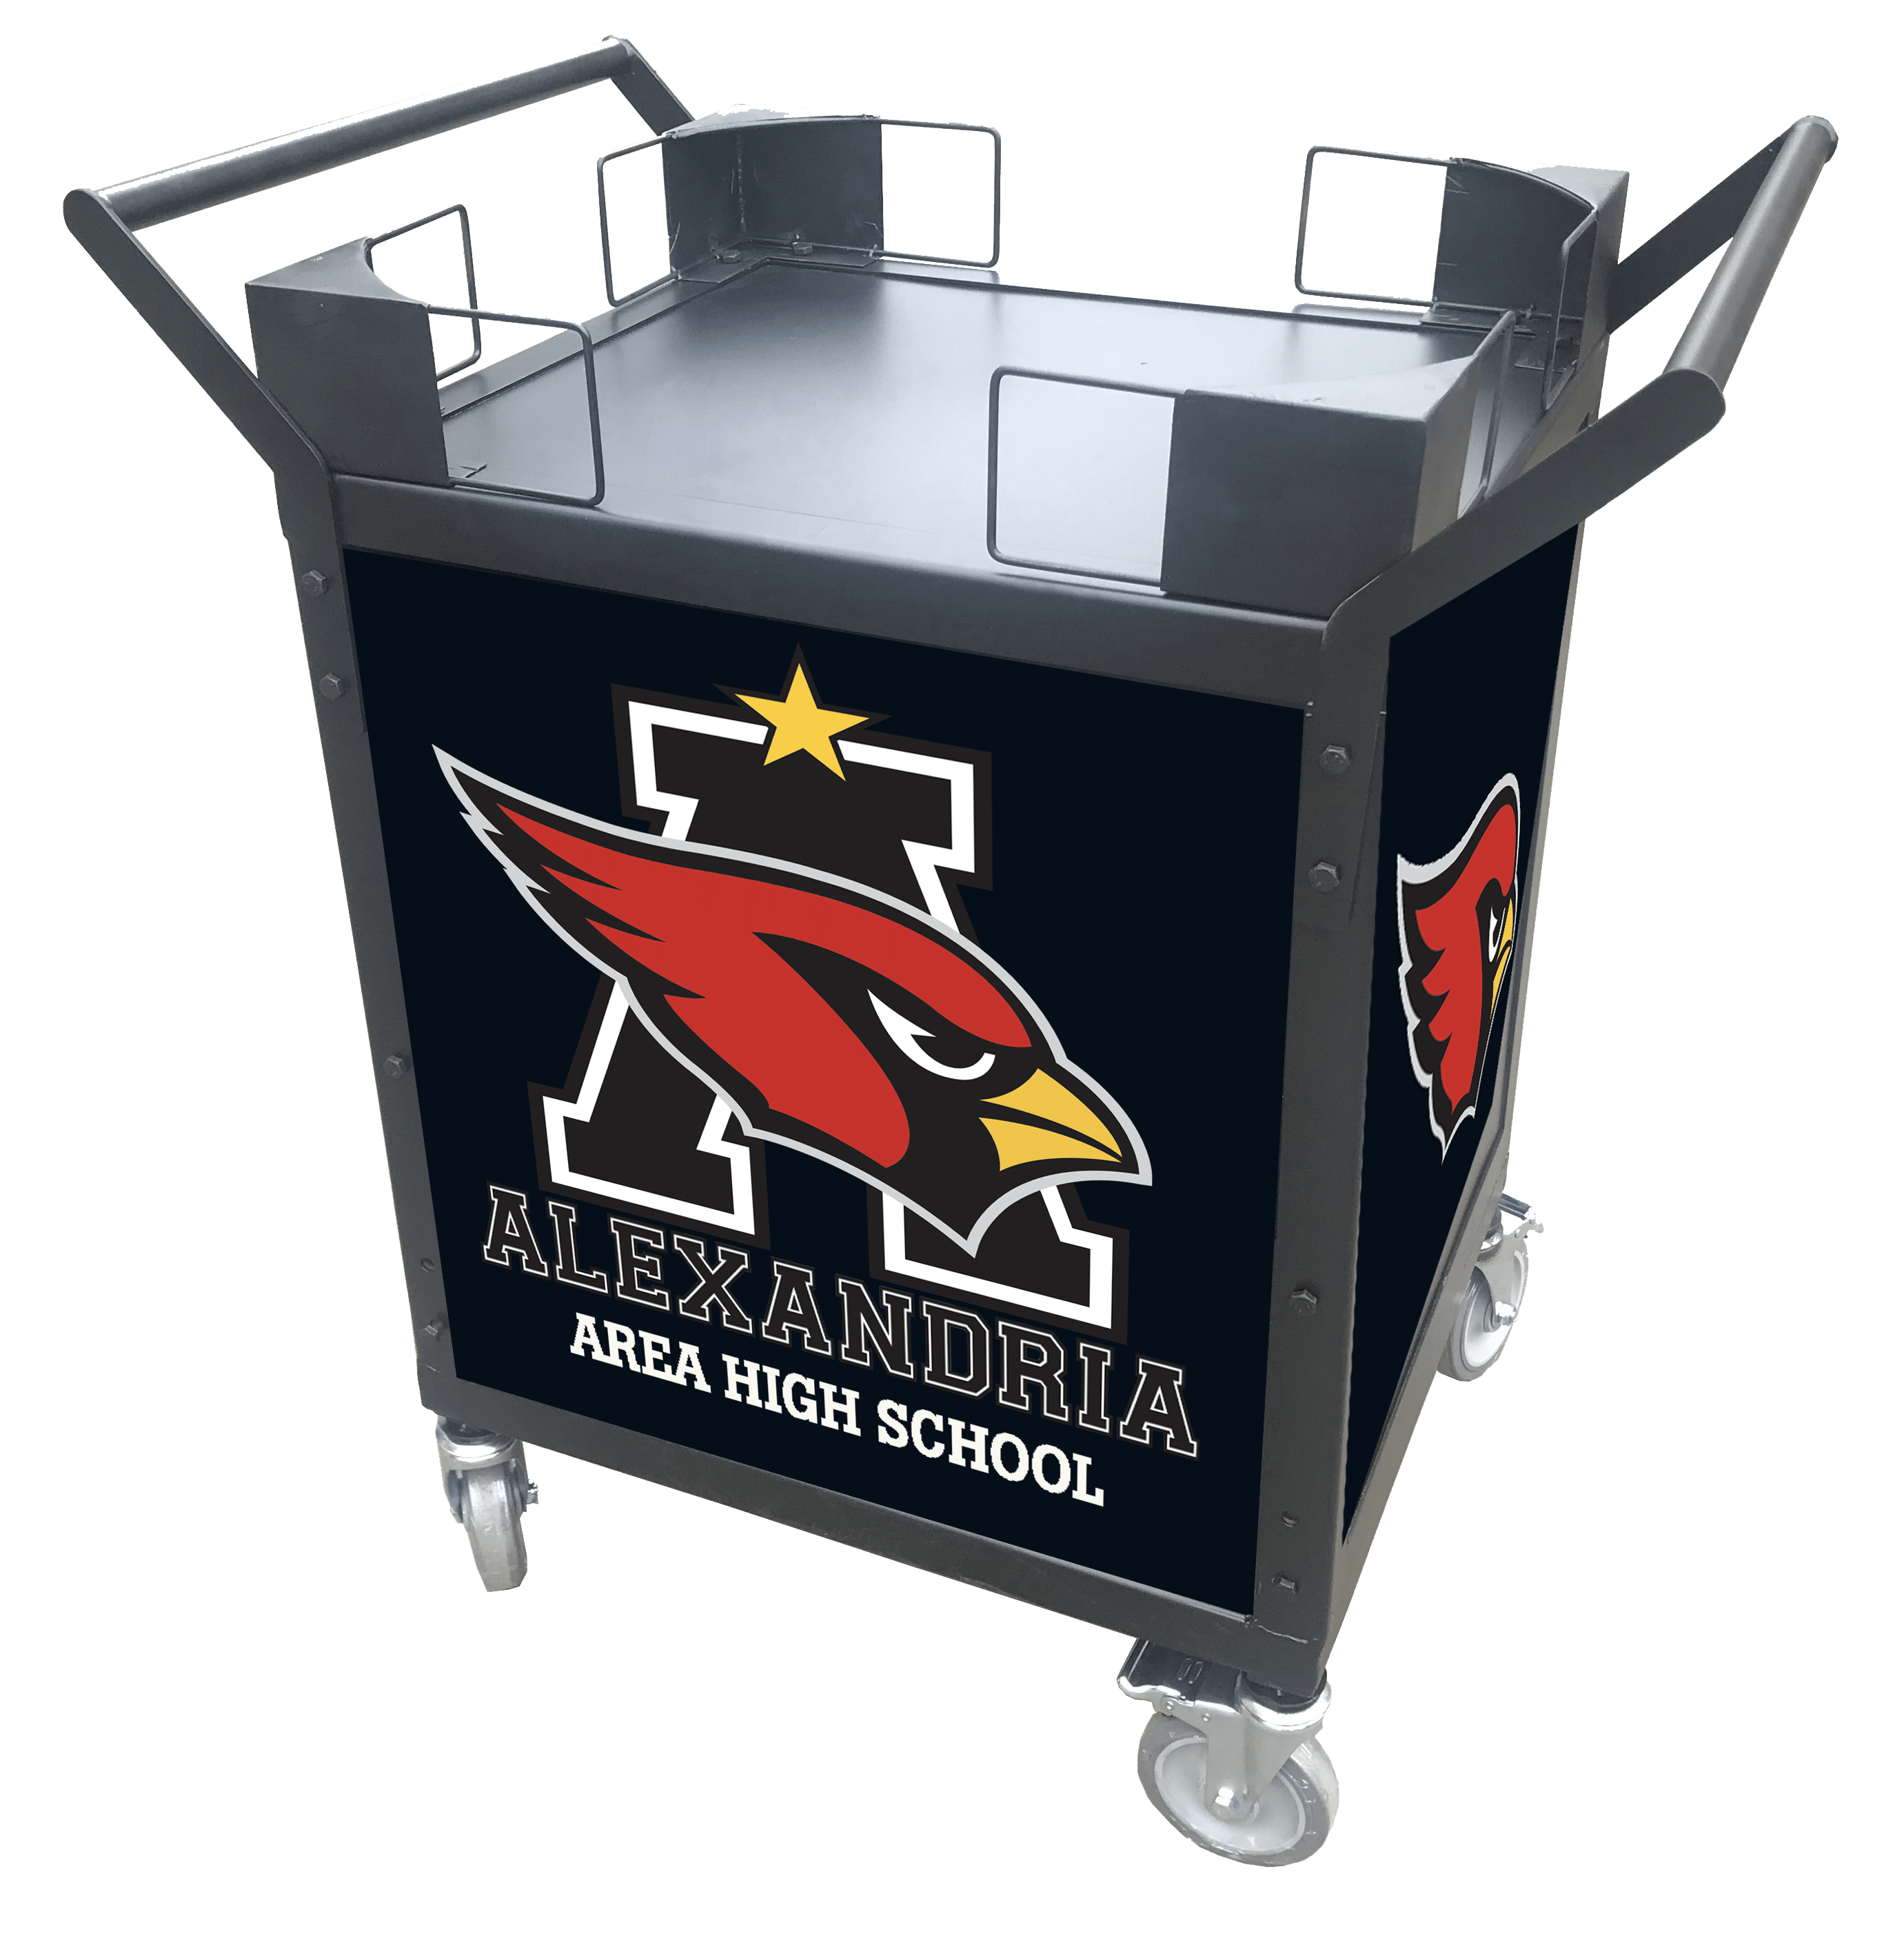 Sideline Hydration Cart: Portable Water Cooler, Sport Hydration System